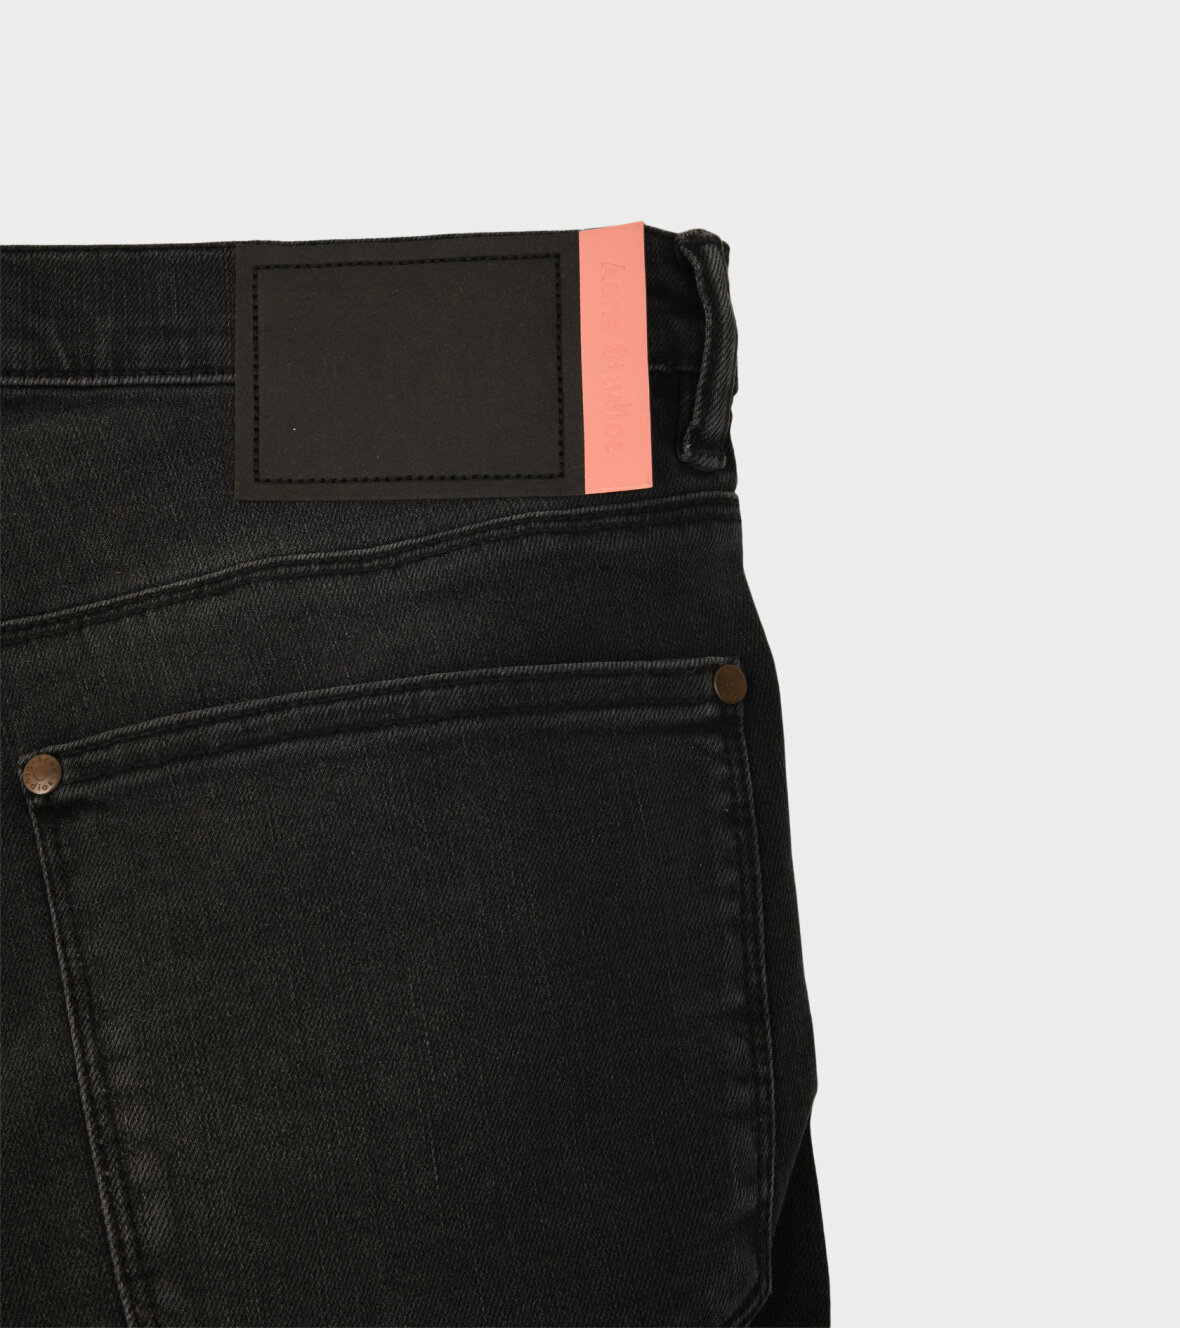 vaccination Hare Bred vifte dr. Adams - Acne Studios Max Jeans Used Black